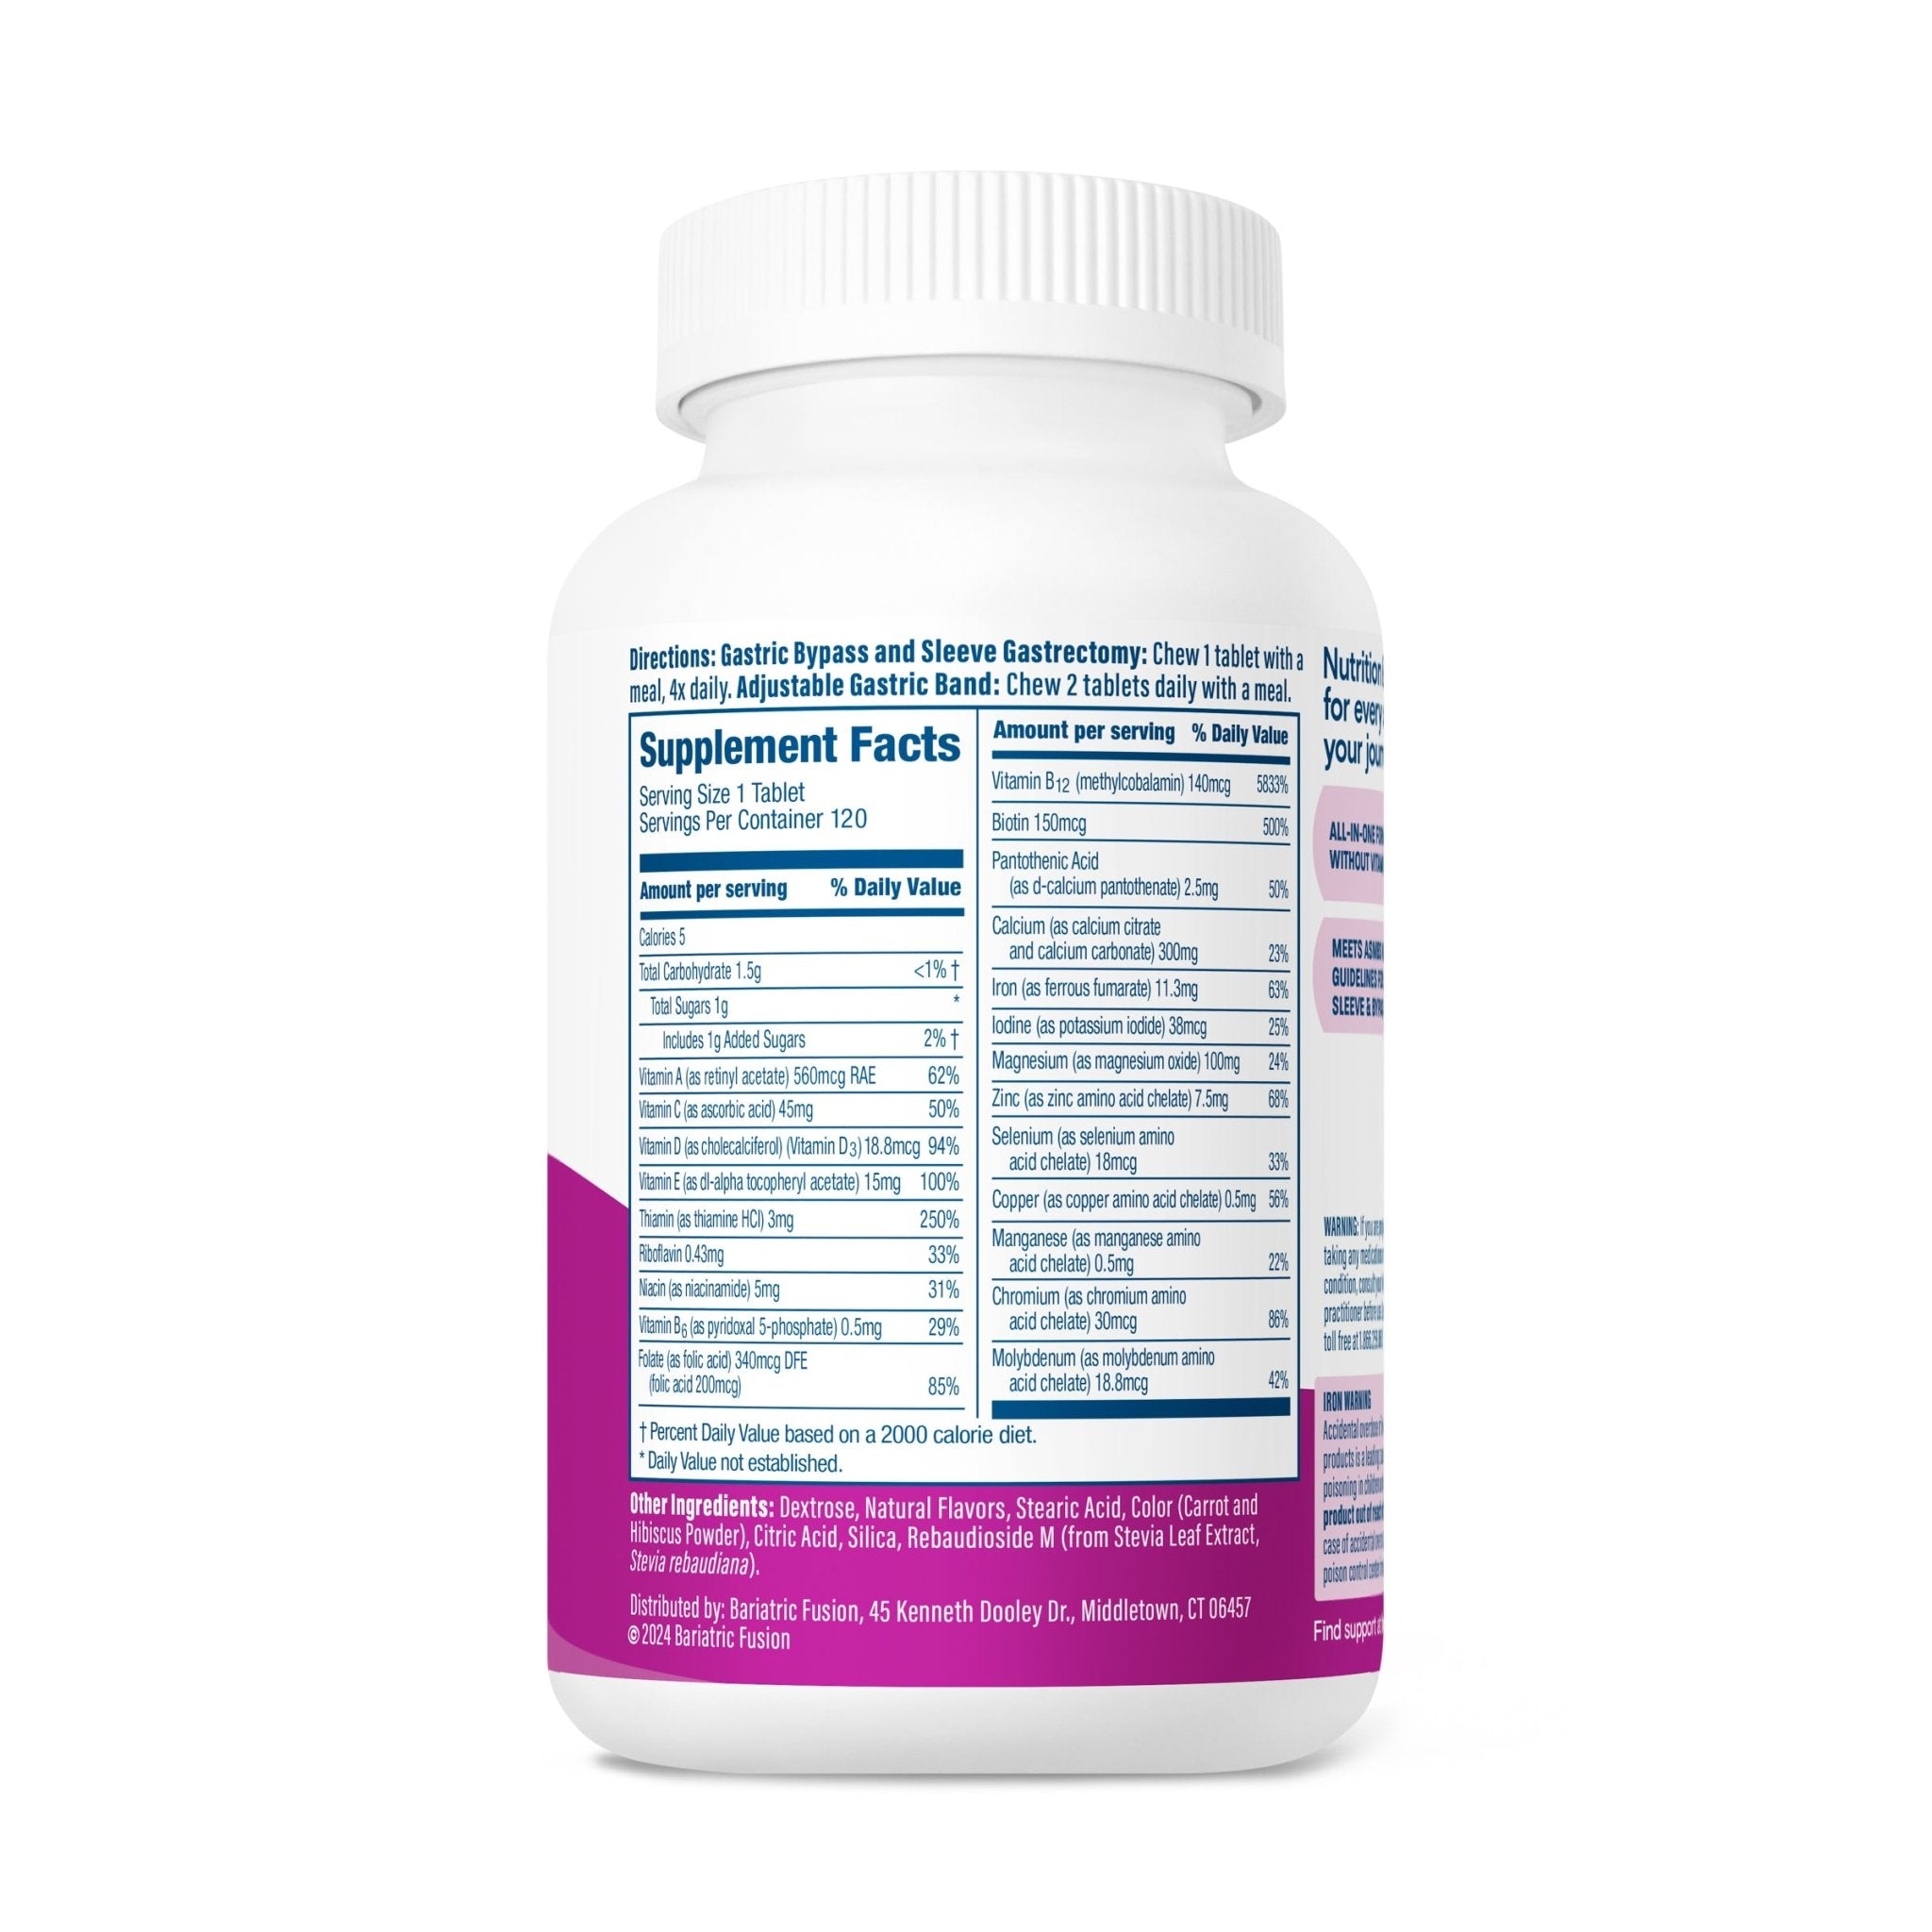 Bariatric Fusion Mixed Berry Complete Chewable Bariatric Multivitamin directions, servings, and ingredients.